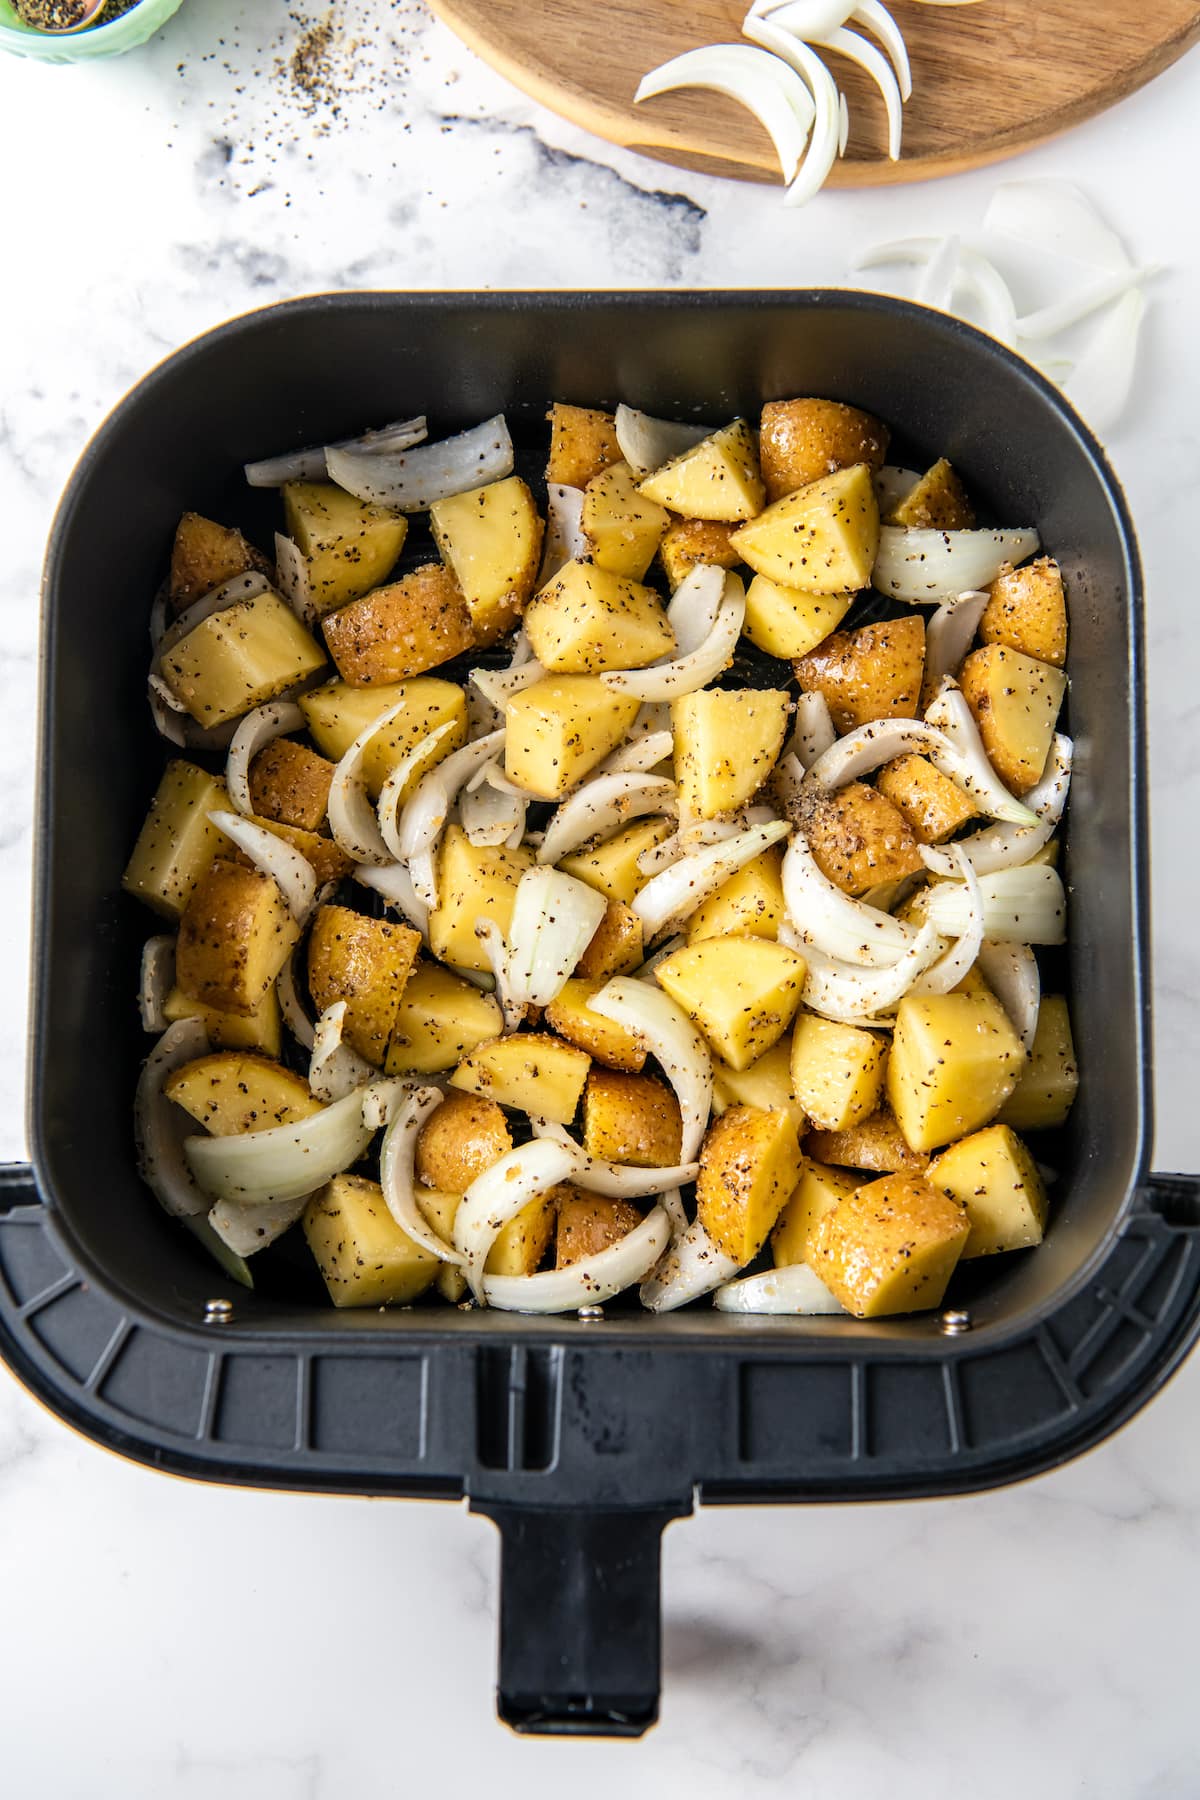 Chopped potatoes and onions in an air fryer.